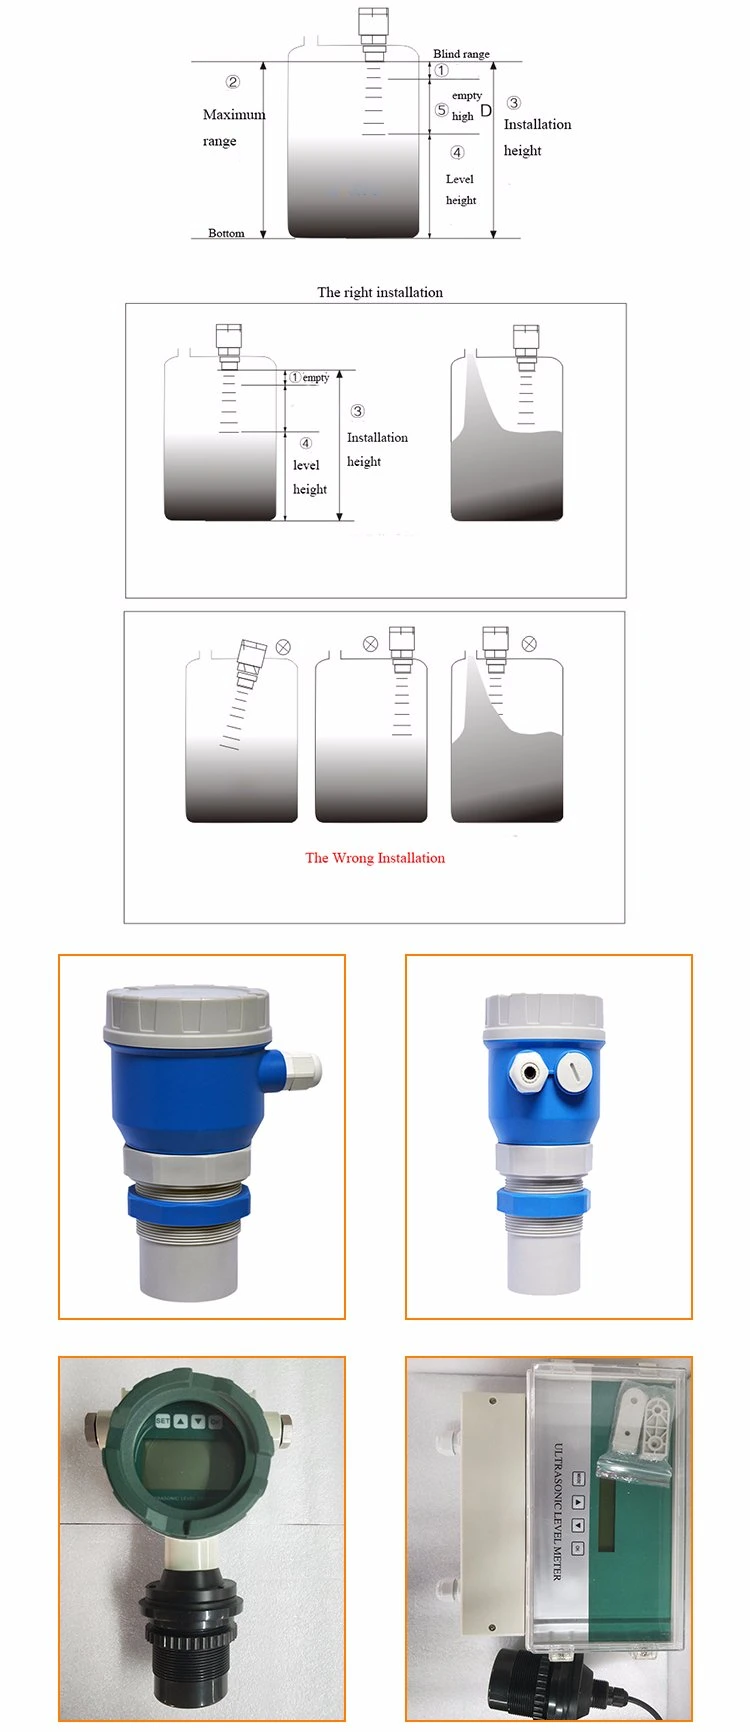 4~20mA Output and Plastic Material Water Level Indicator for Water Tank